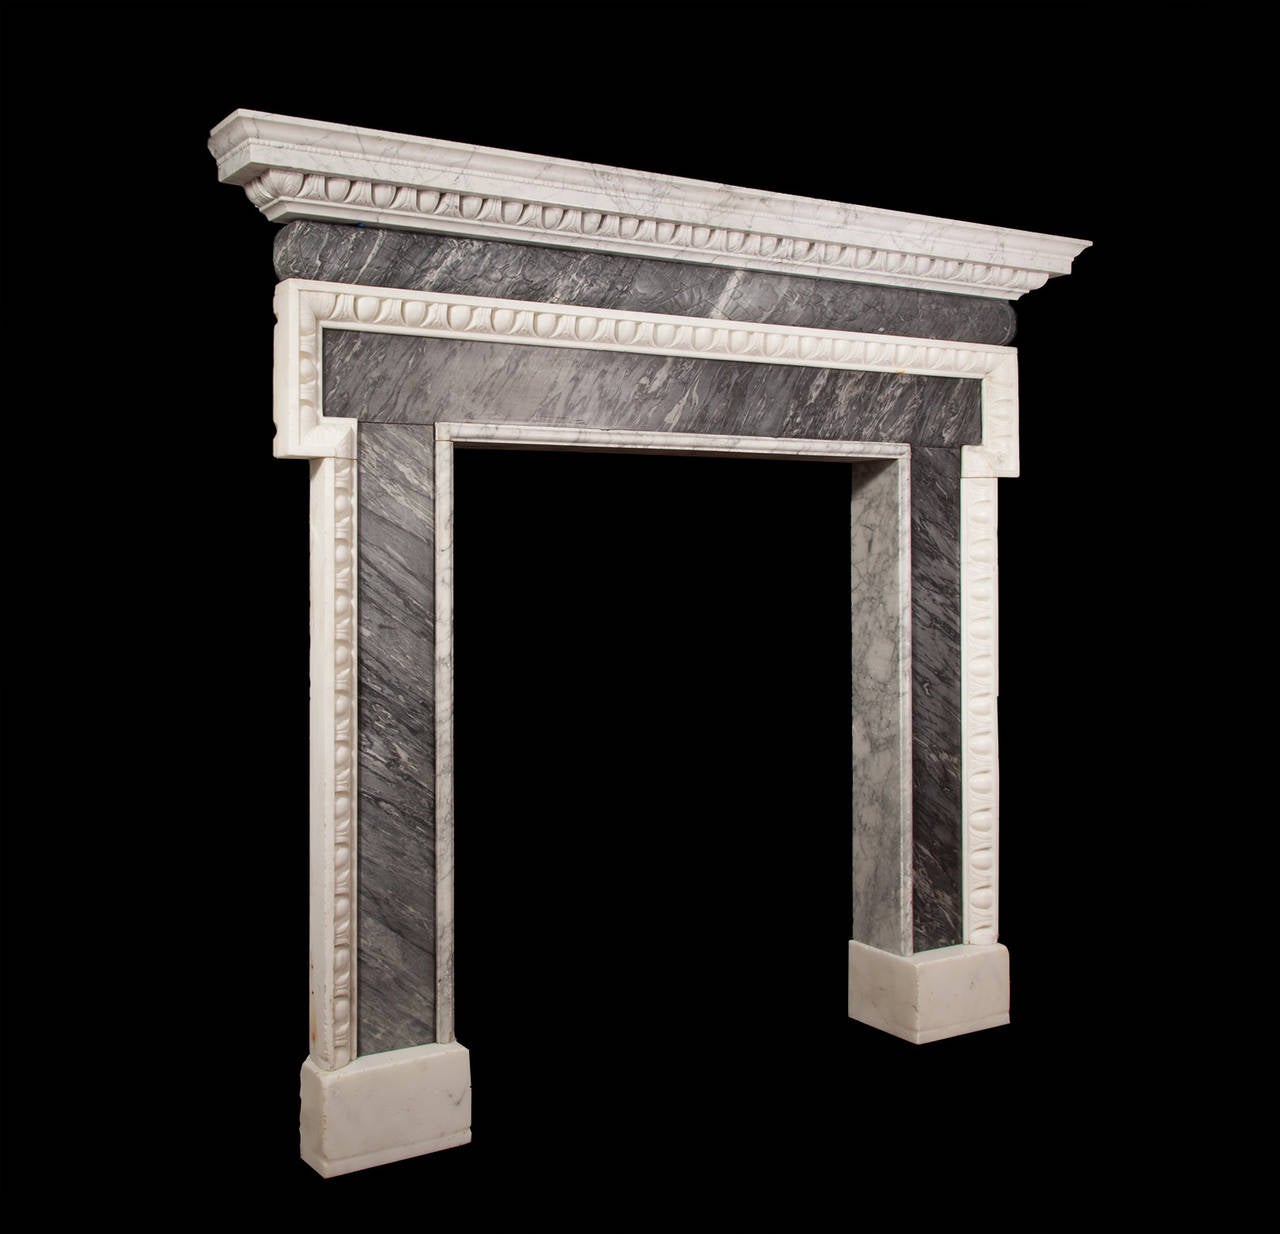 The grey Bardiglio marble frieze is barrel shaped and decorated with garlands of oak leaves and acorns, tied by ribbon in the centre. This is upheld by dogleg jambs carved with egg and bellflower mouldings. The Carrara marble shelf with pencil